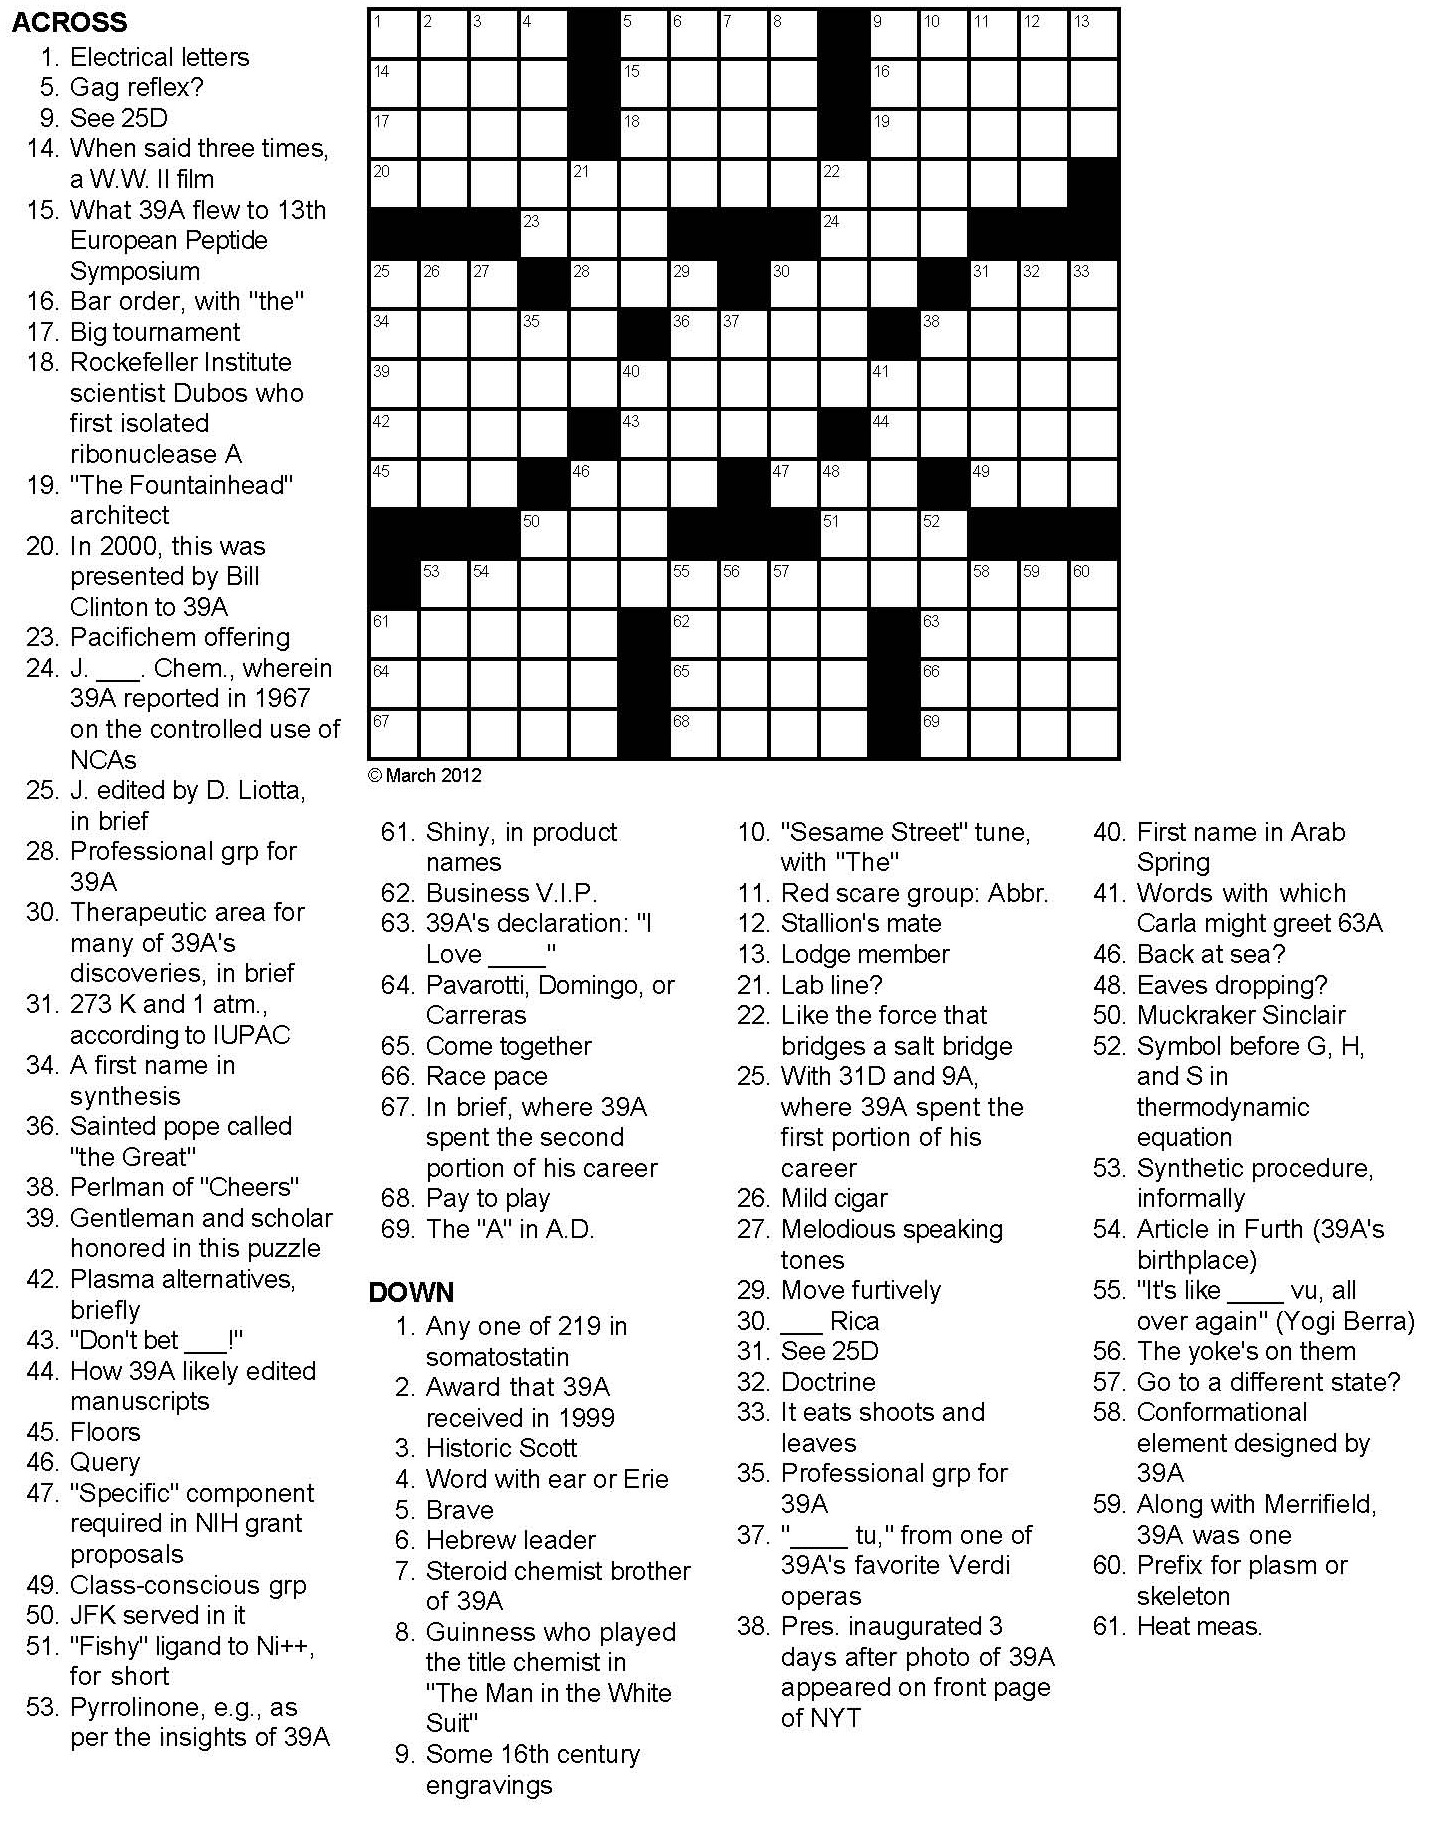 Free Easy Printable Crossword Puzzles For Adults Pdf - DGA Quarterly